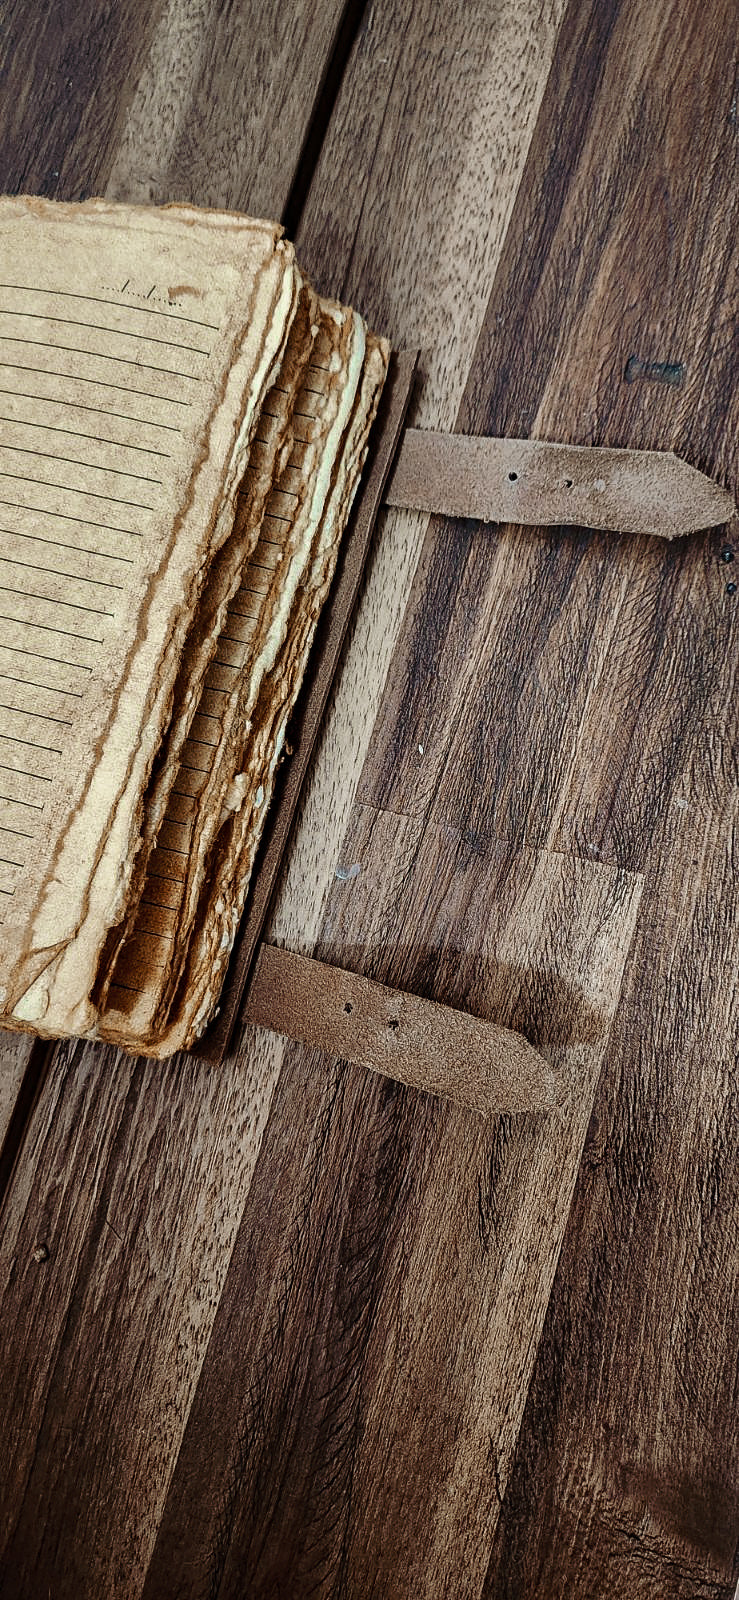 Antique Leather Journal